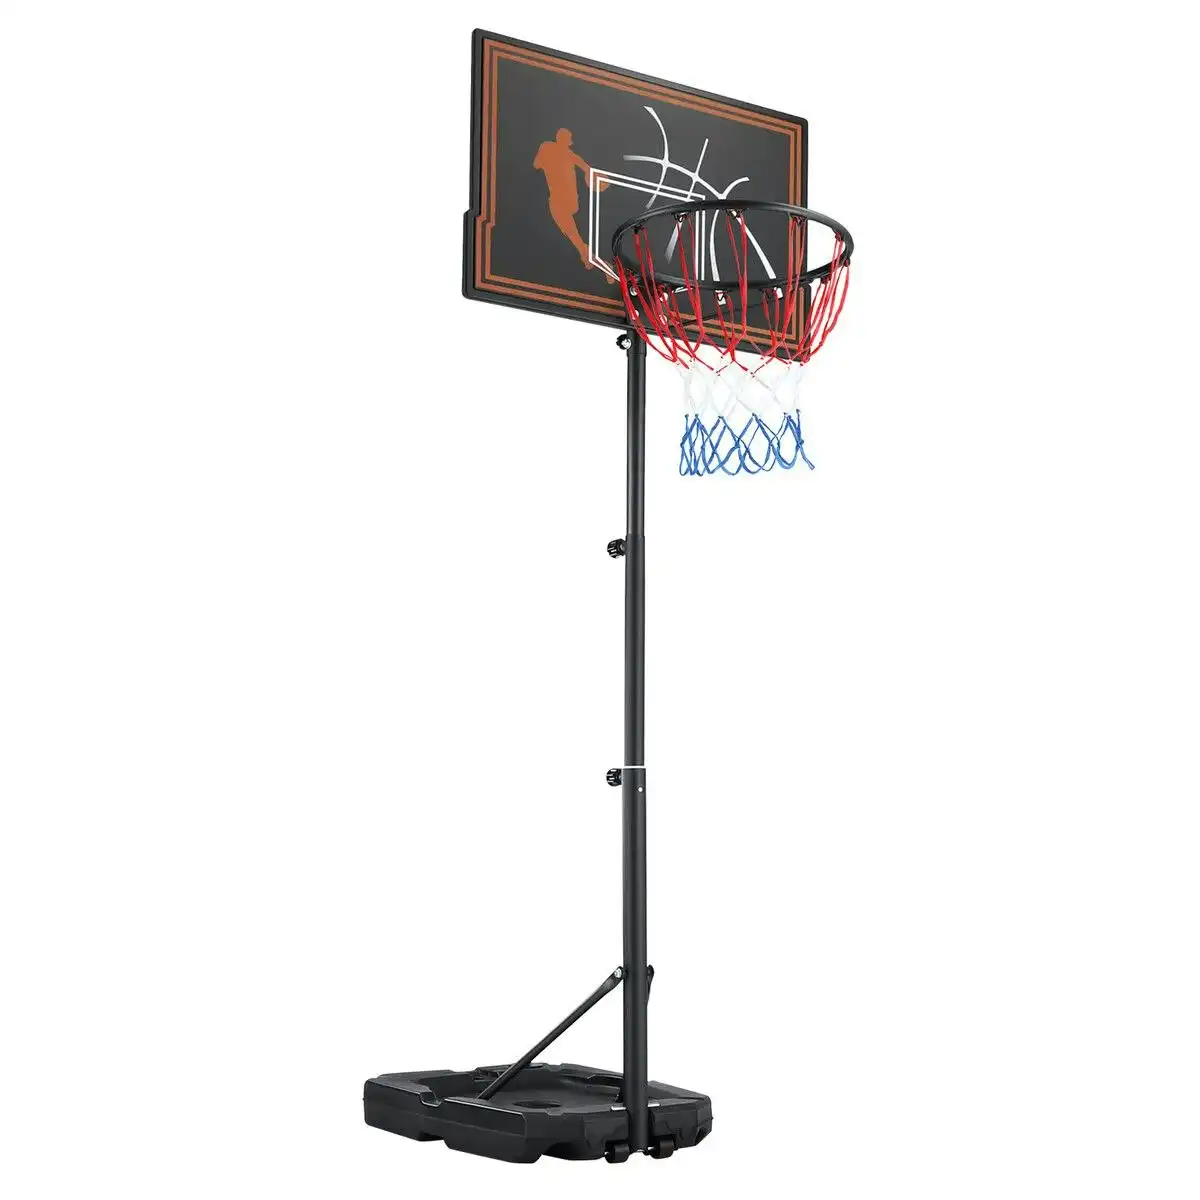 Genki  1.1 to 2.1m Portable Basketball System Stand Ring Hoop Height Adjustable Equipment Indoor for Kids Adults